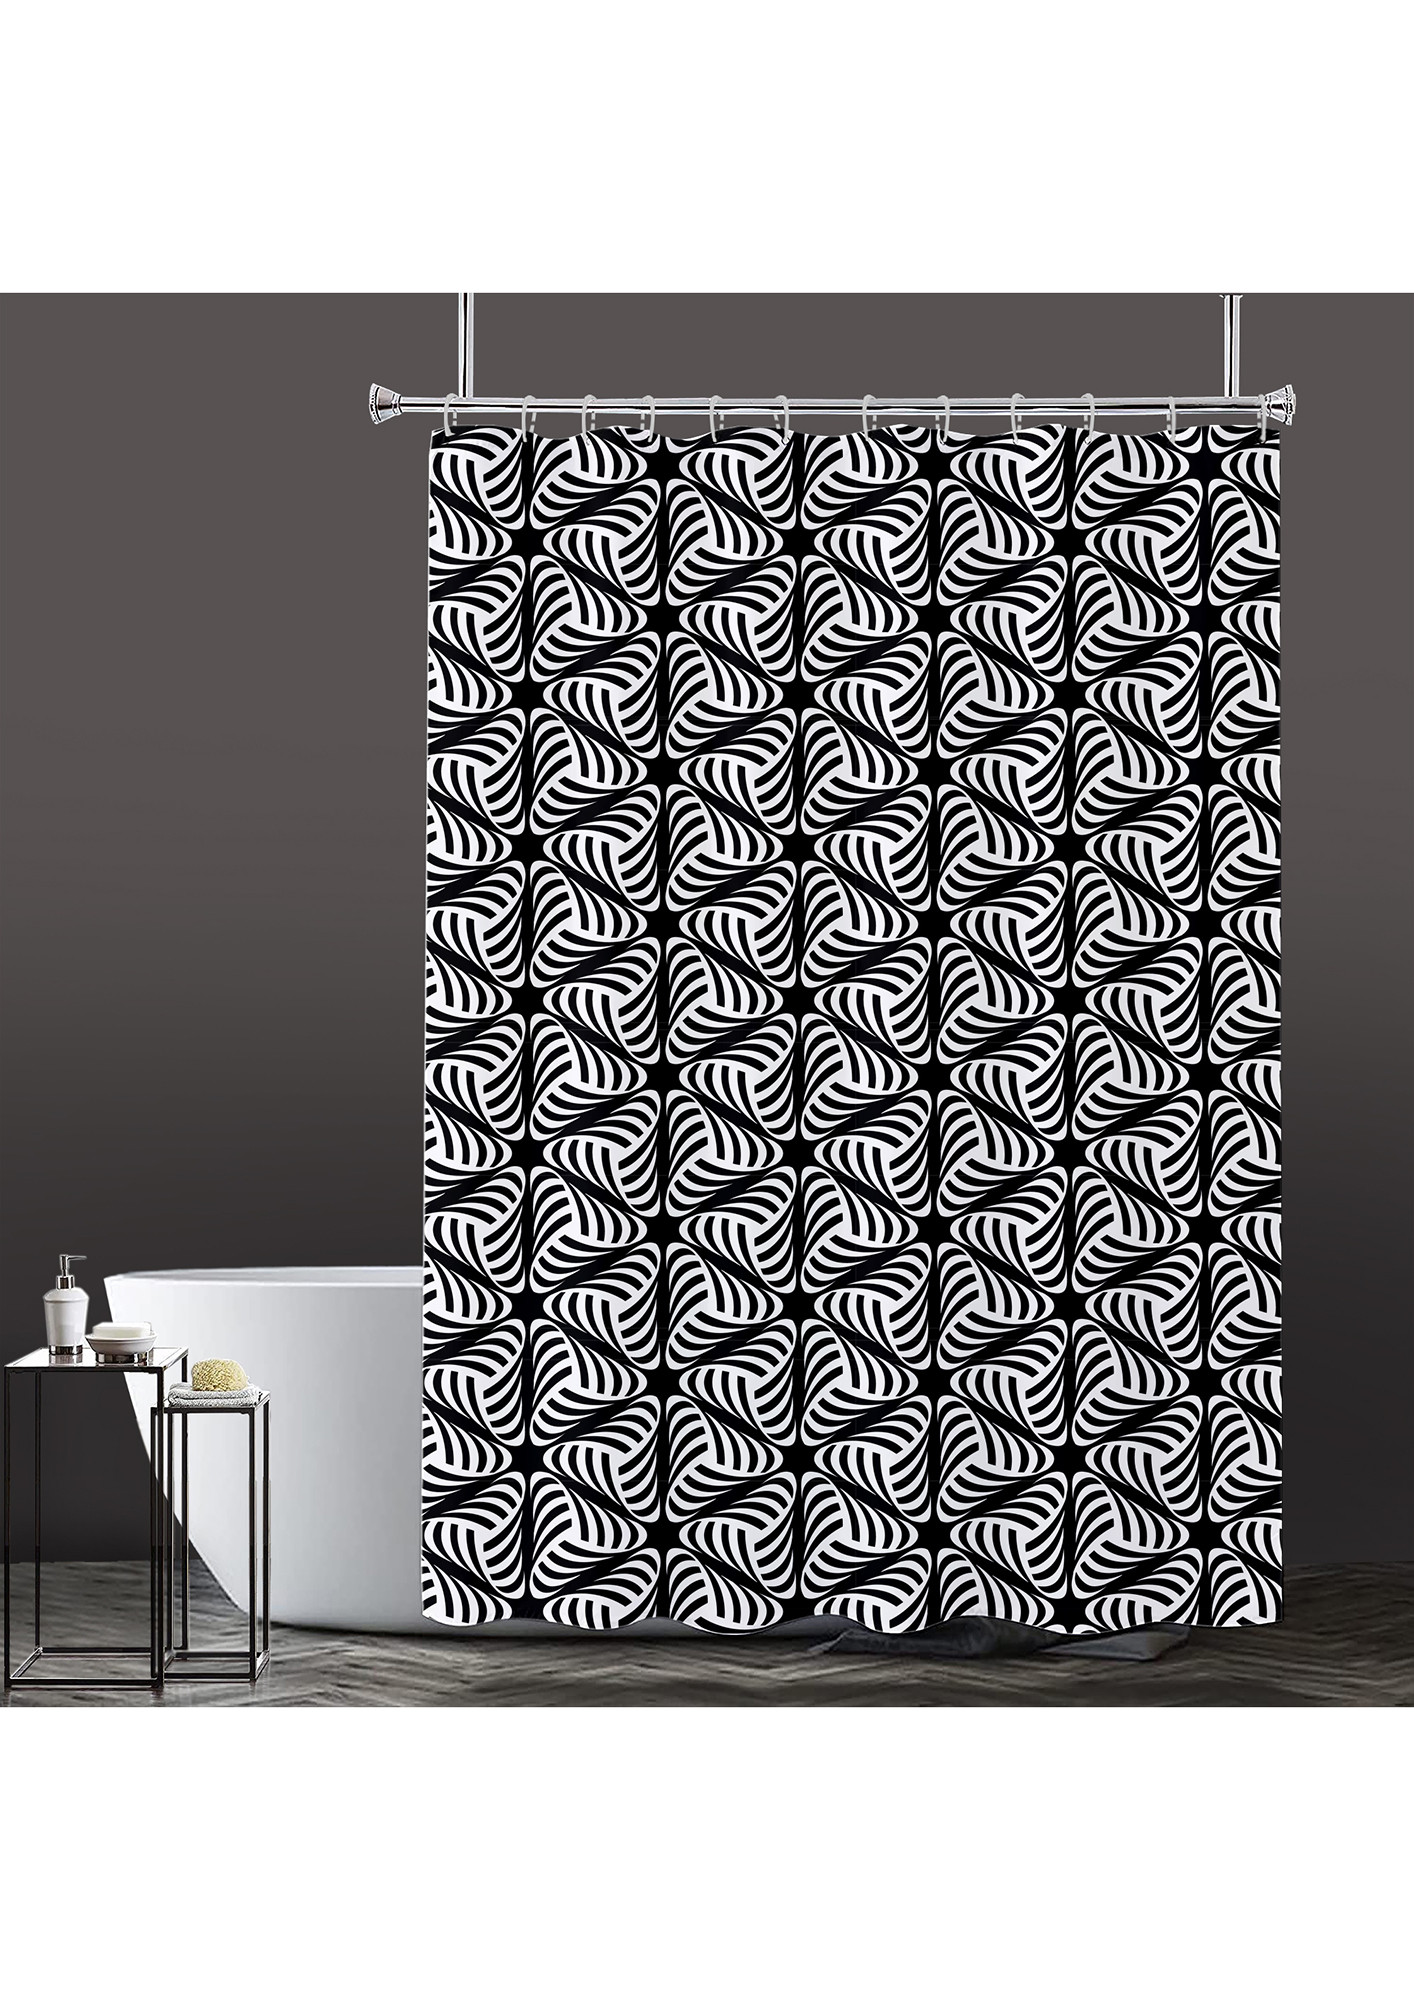 Lushomes Bathroom Shower Curtain with 12 Hooks and 12 Eyelets, Printed Desginer Swirly Triangles Bathtub Curtain, Non-PVC, Water-repellent bathroom Accessories, Black/White,  6 Ft H x 6.5 FT W (72 Inch x 80 Inch, Single Pc)